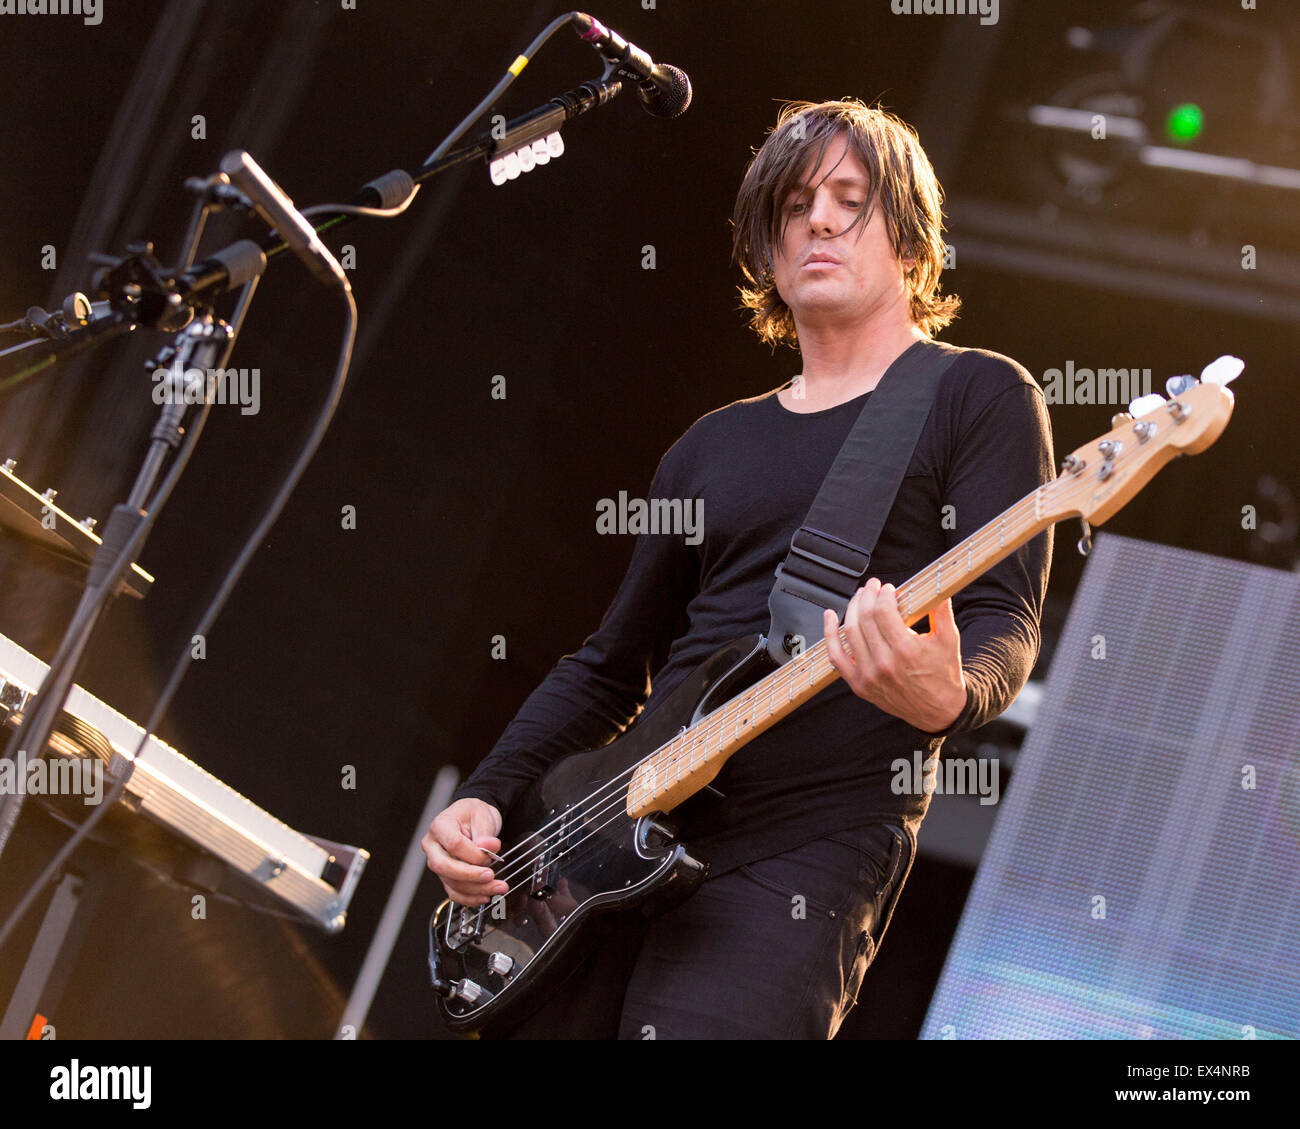 Milwaukee, Wisconsin, USA. 4th July, 2015. Musician GREG EDWARDS of Failure performs live on stage at the Summerfest Music Festival in Milwaukee, Wisconsin © Daniel DeSlover/ZUMA Wire/Alamy Live News Stock Photo